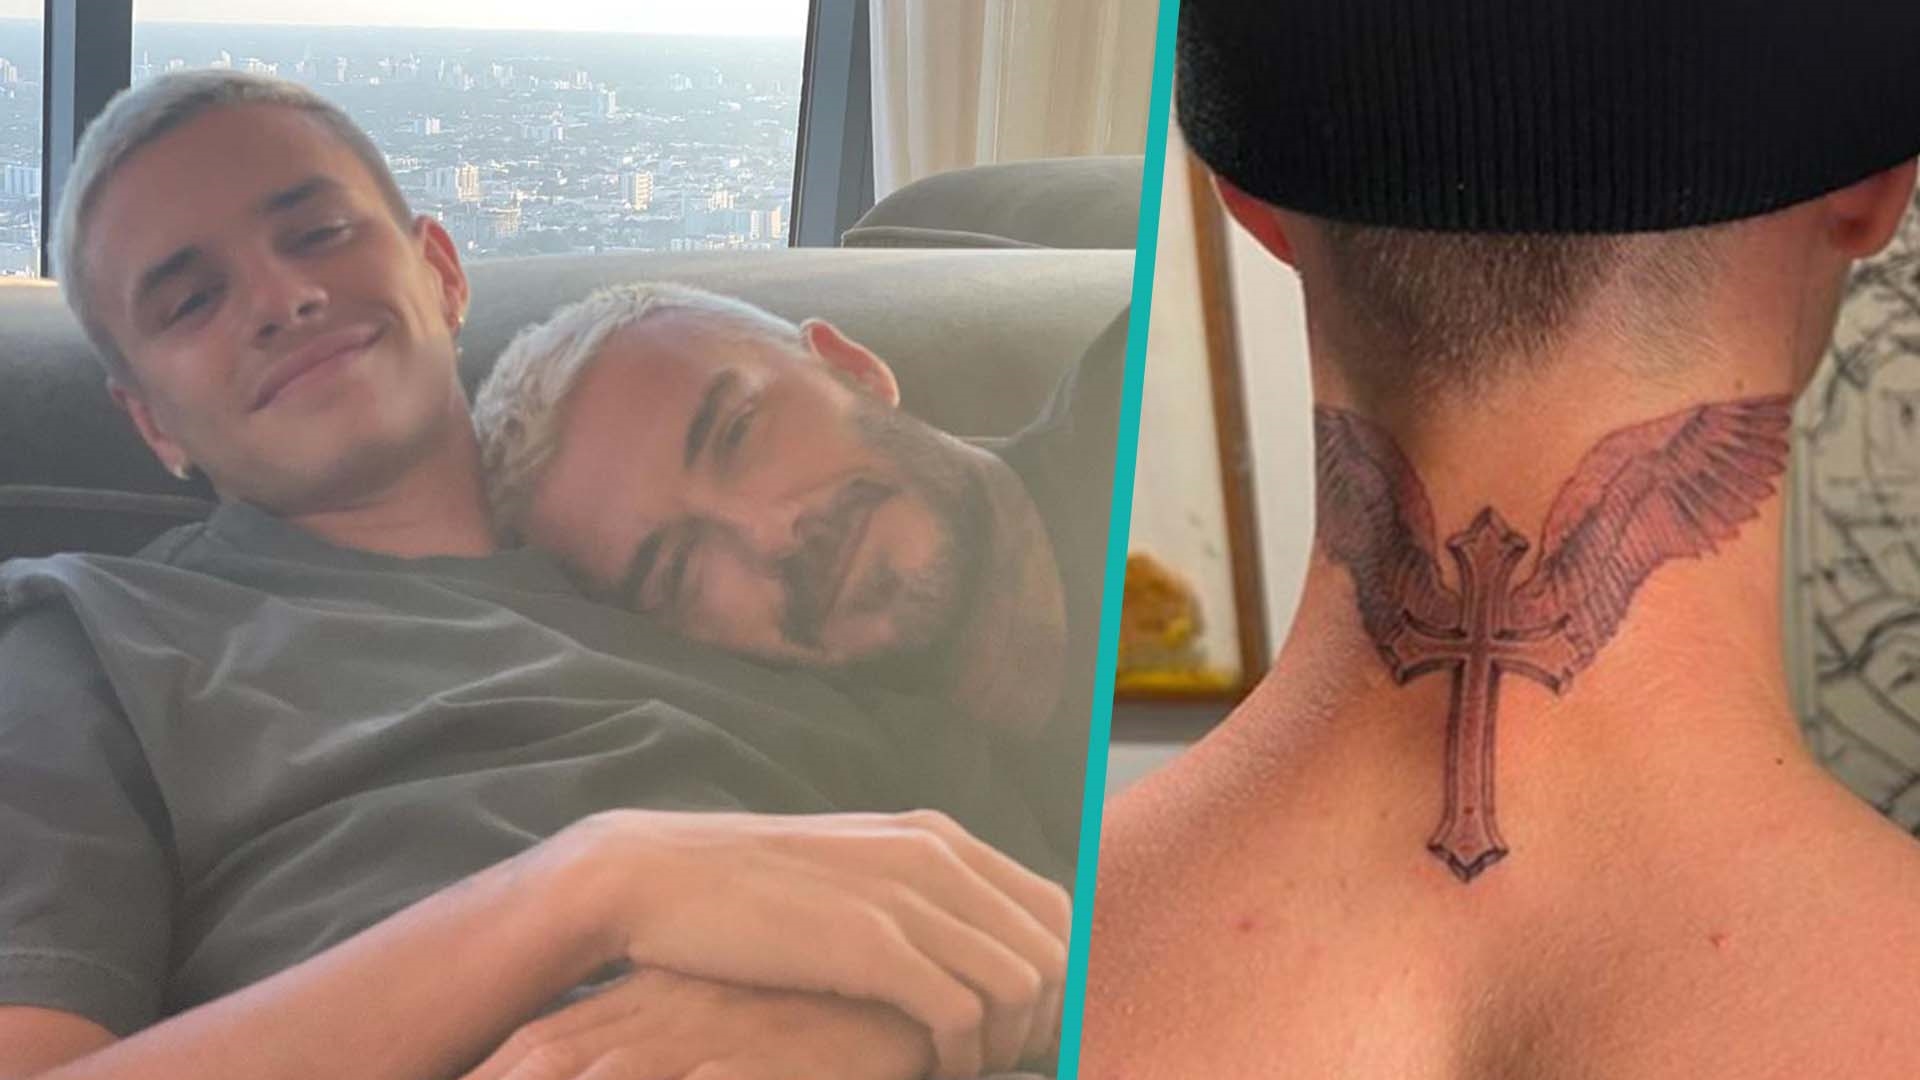 David Beckham's Son Gets Tattoo Nearly Identical To His – NBC New York